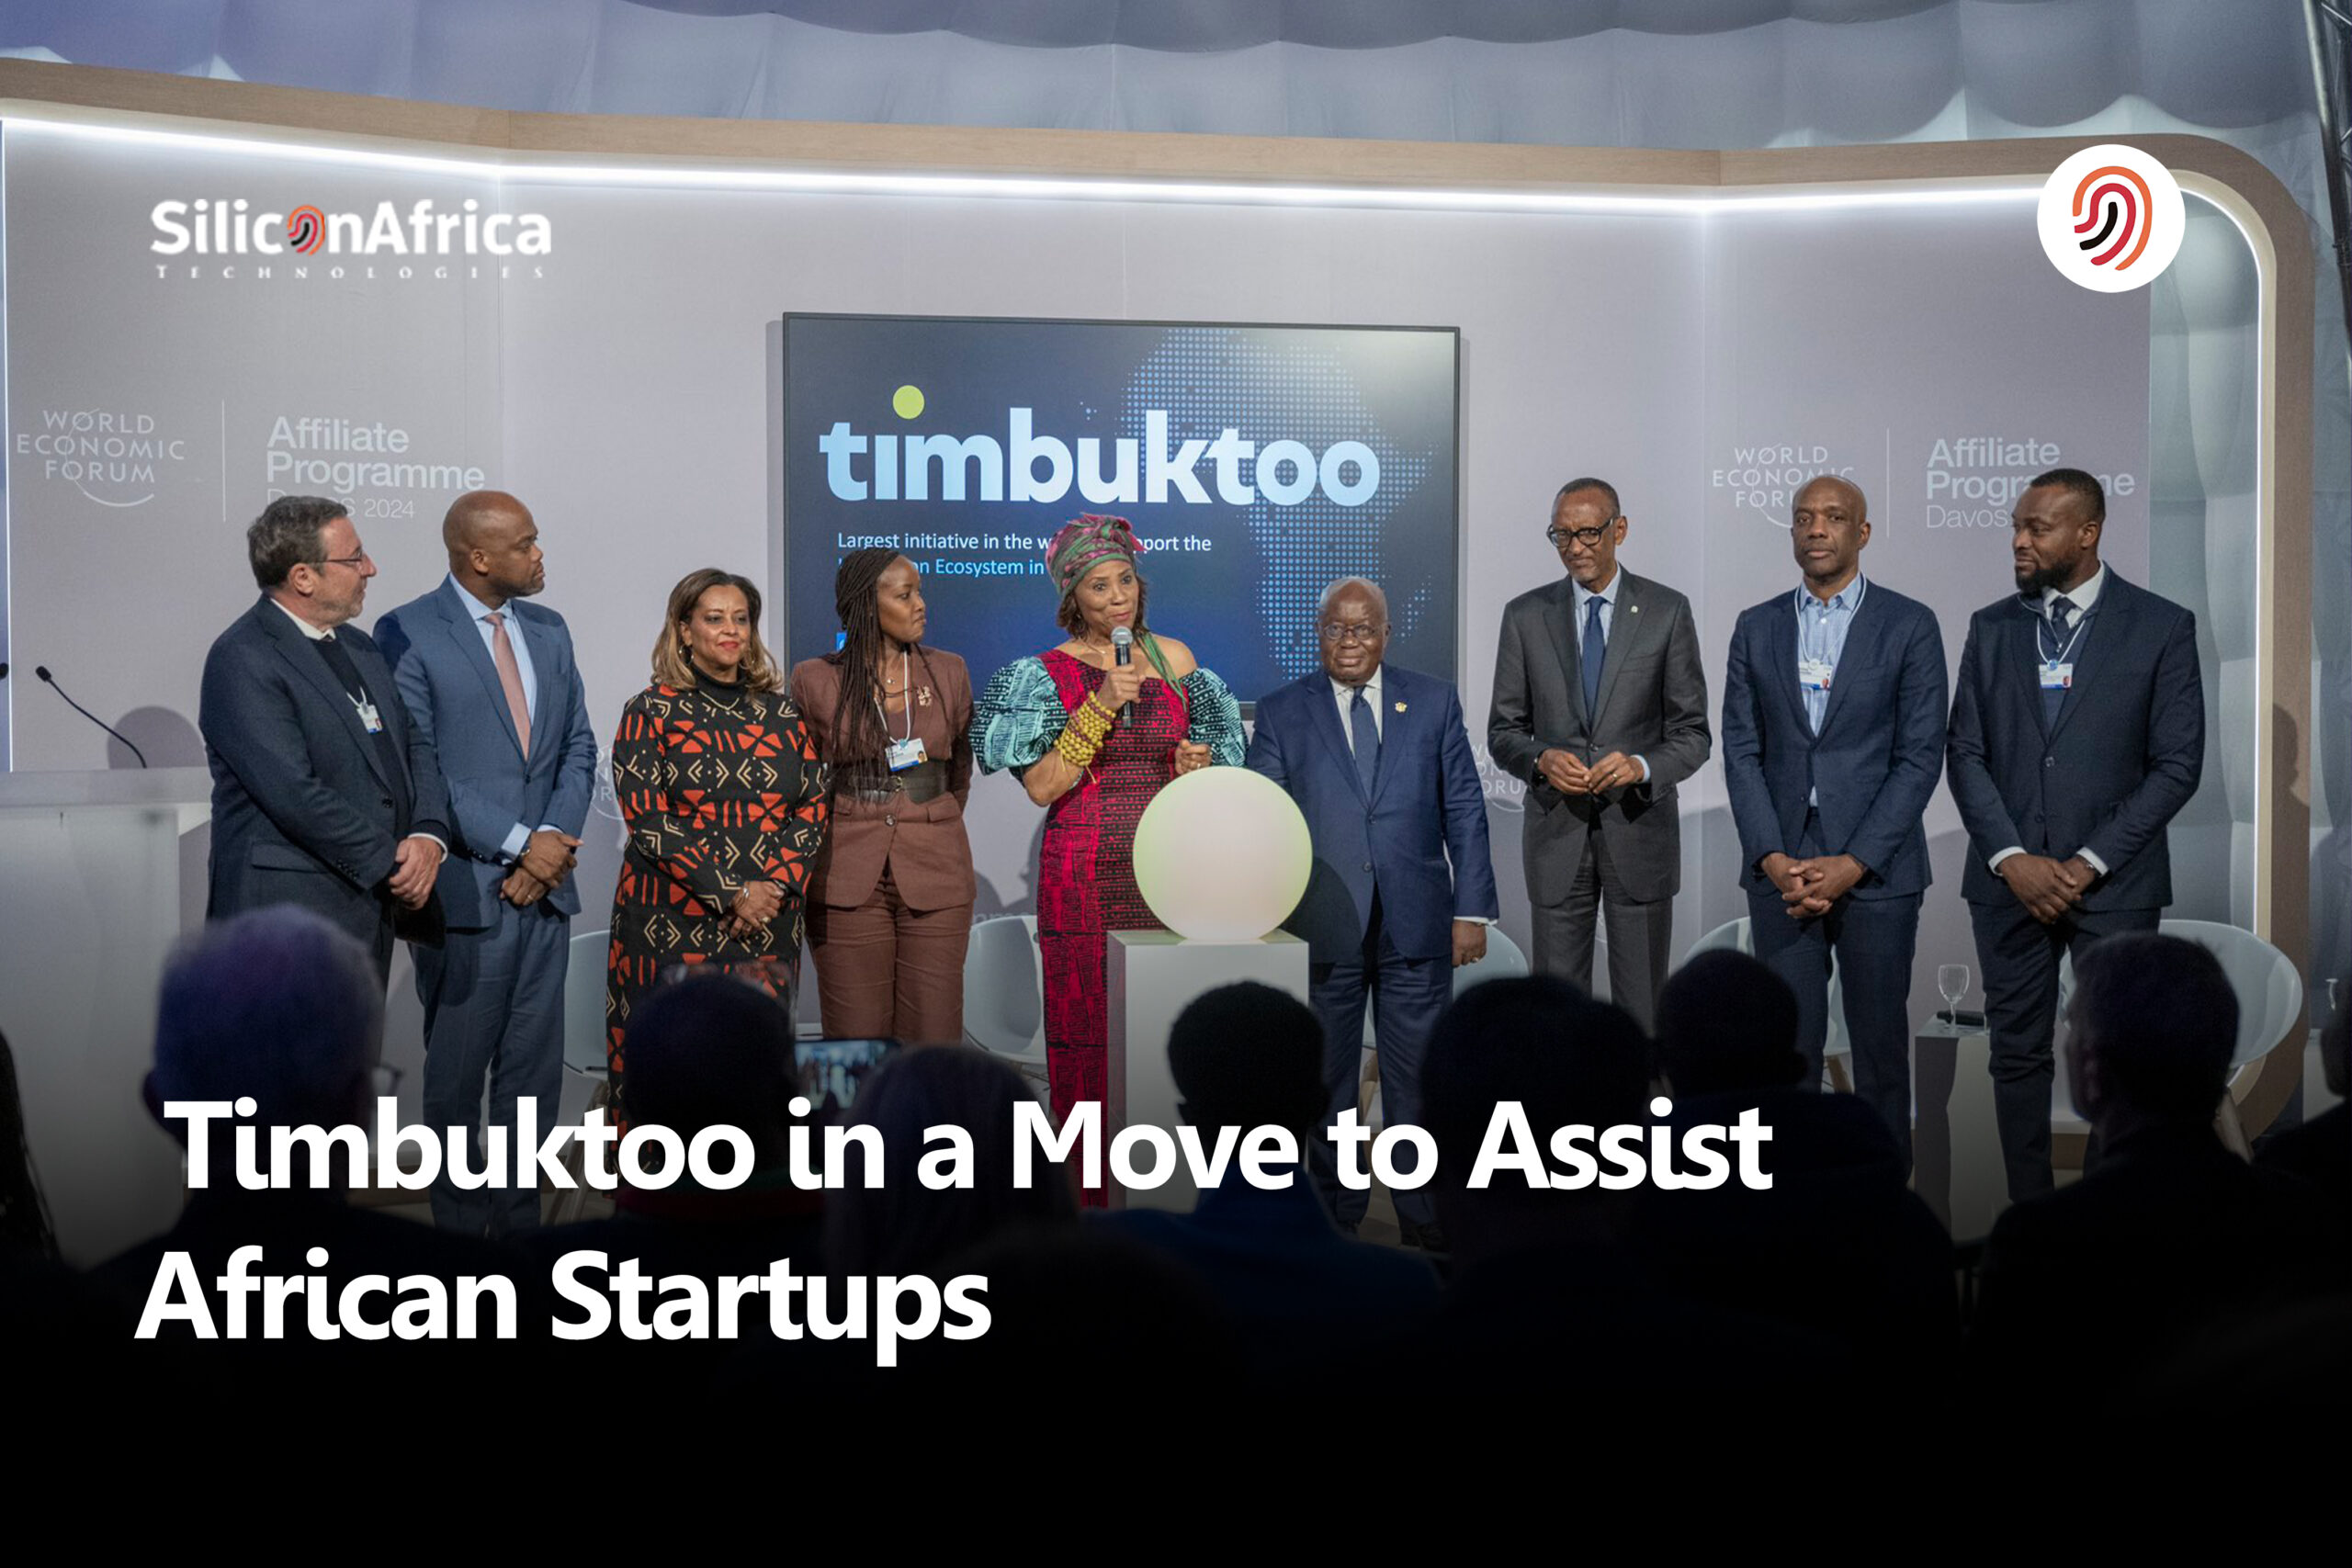 Timbuktoo in a Move to Assist African Startups